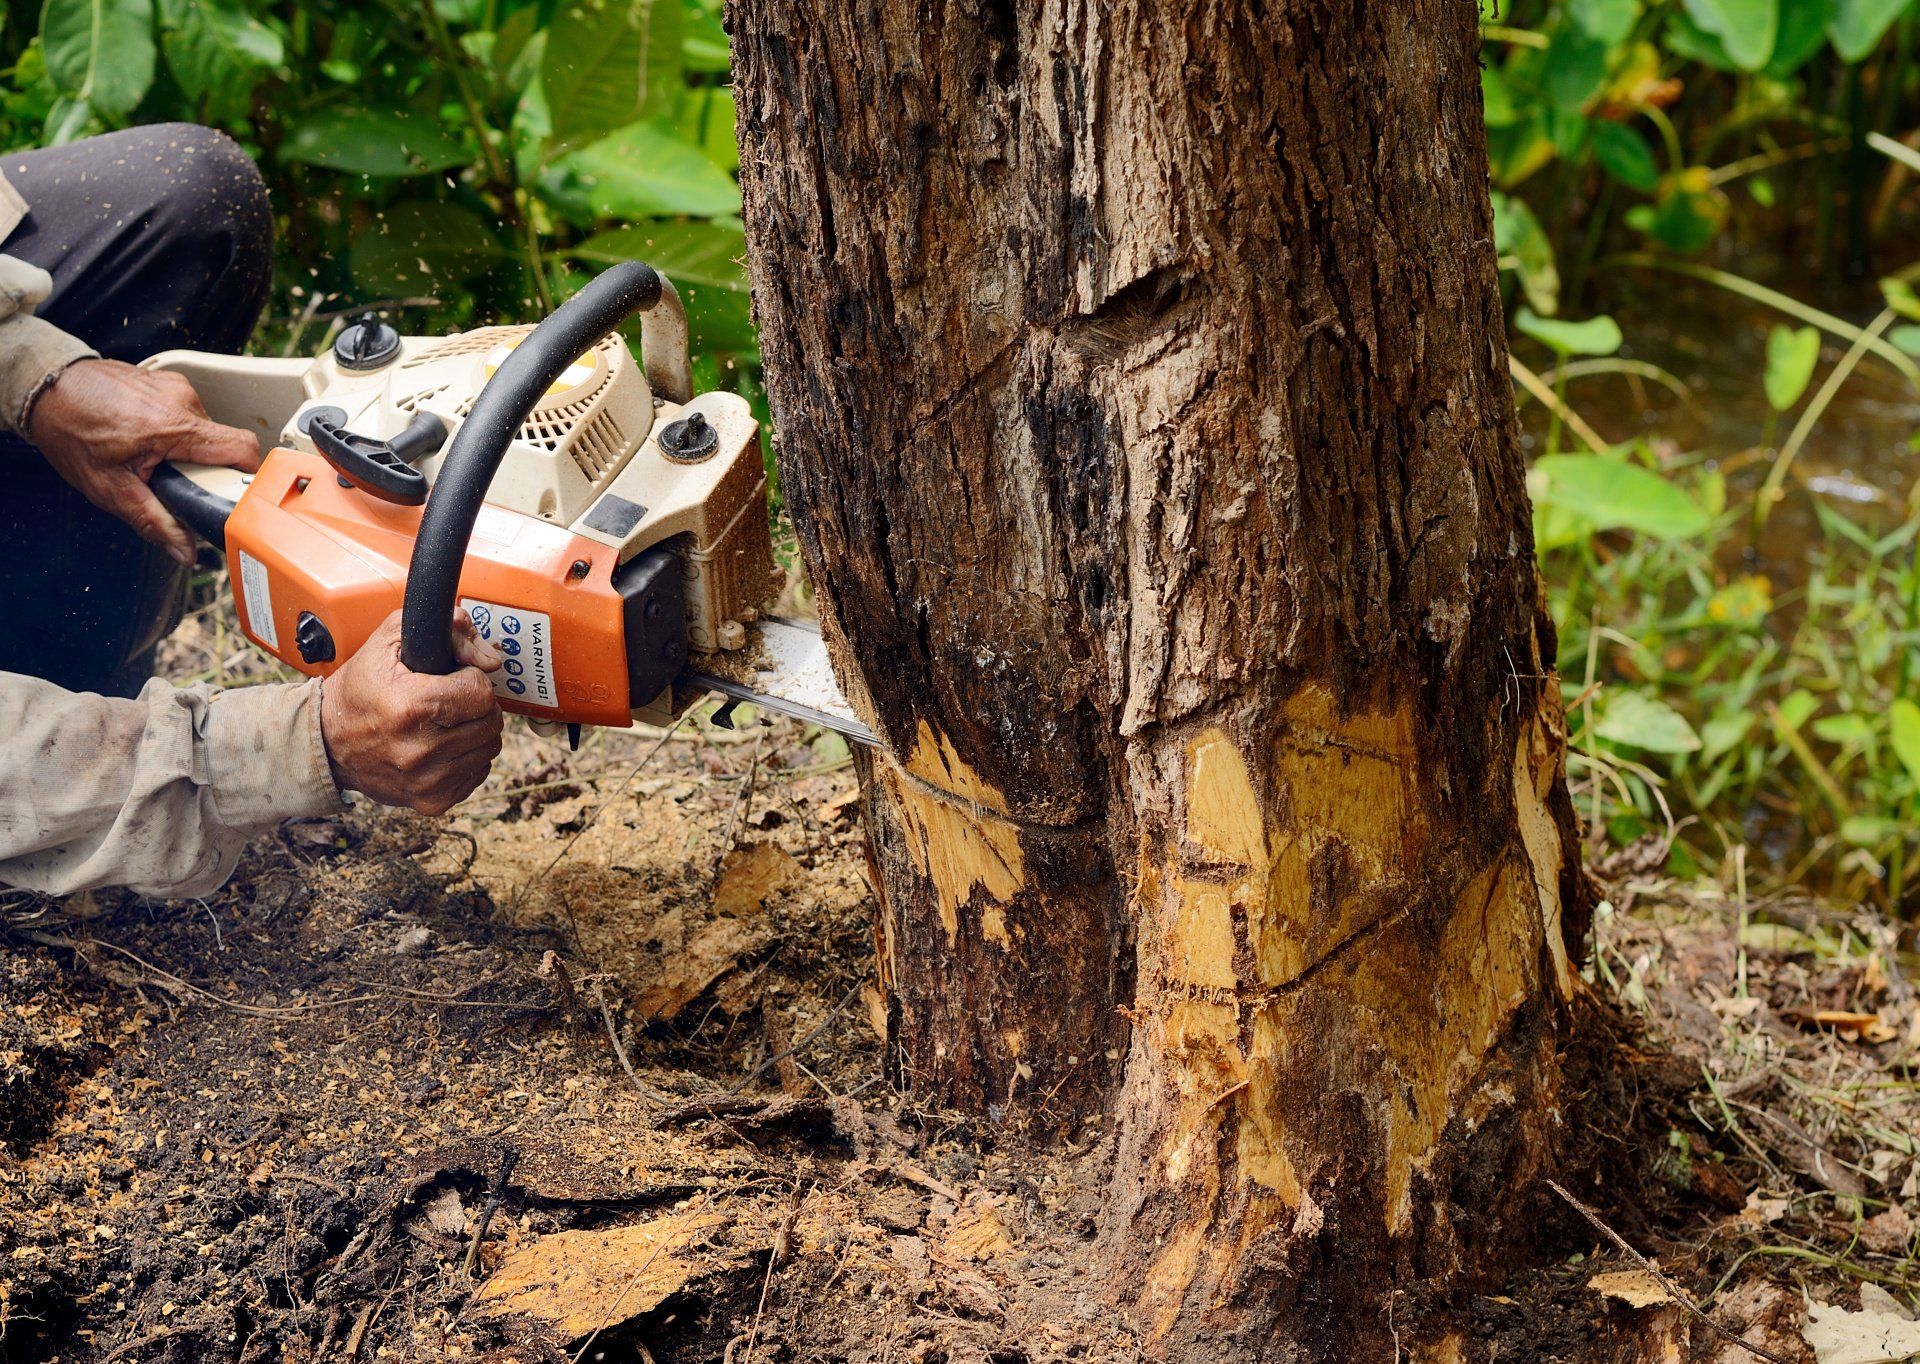 Man operating a chainsaw to cut down a tree in a forest clearing.